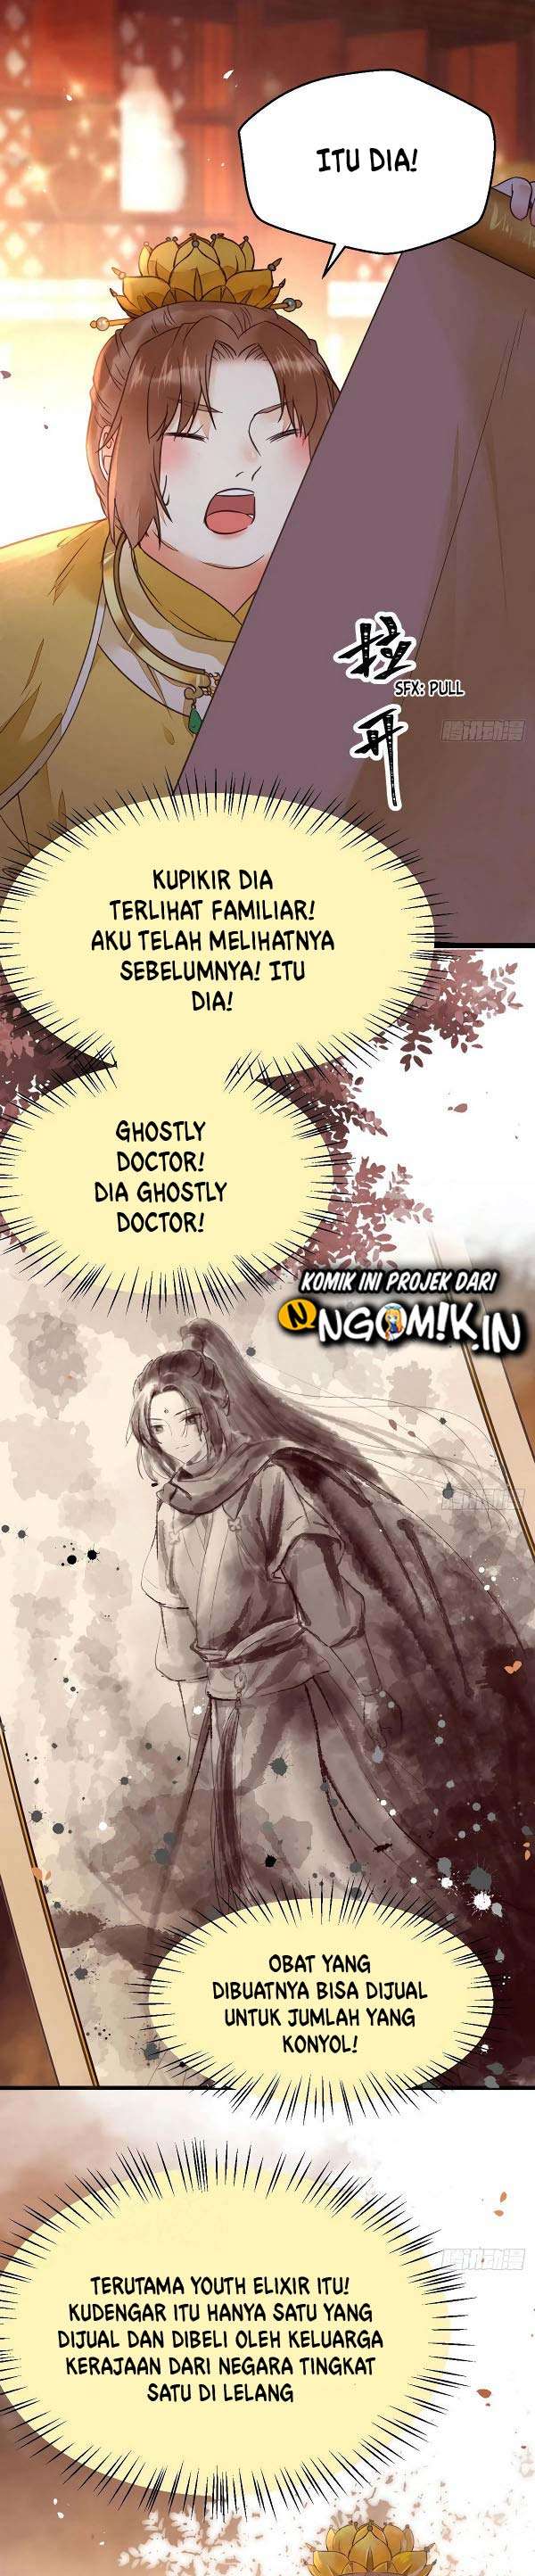 The Ghostly Doctor Chapter 352